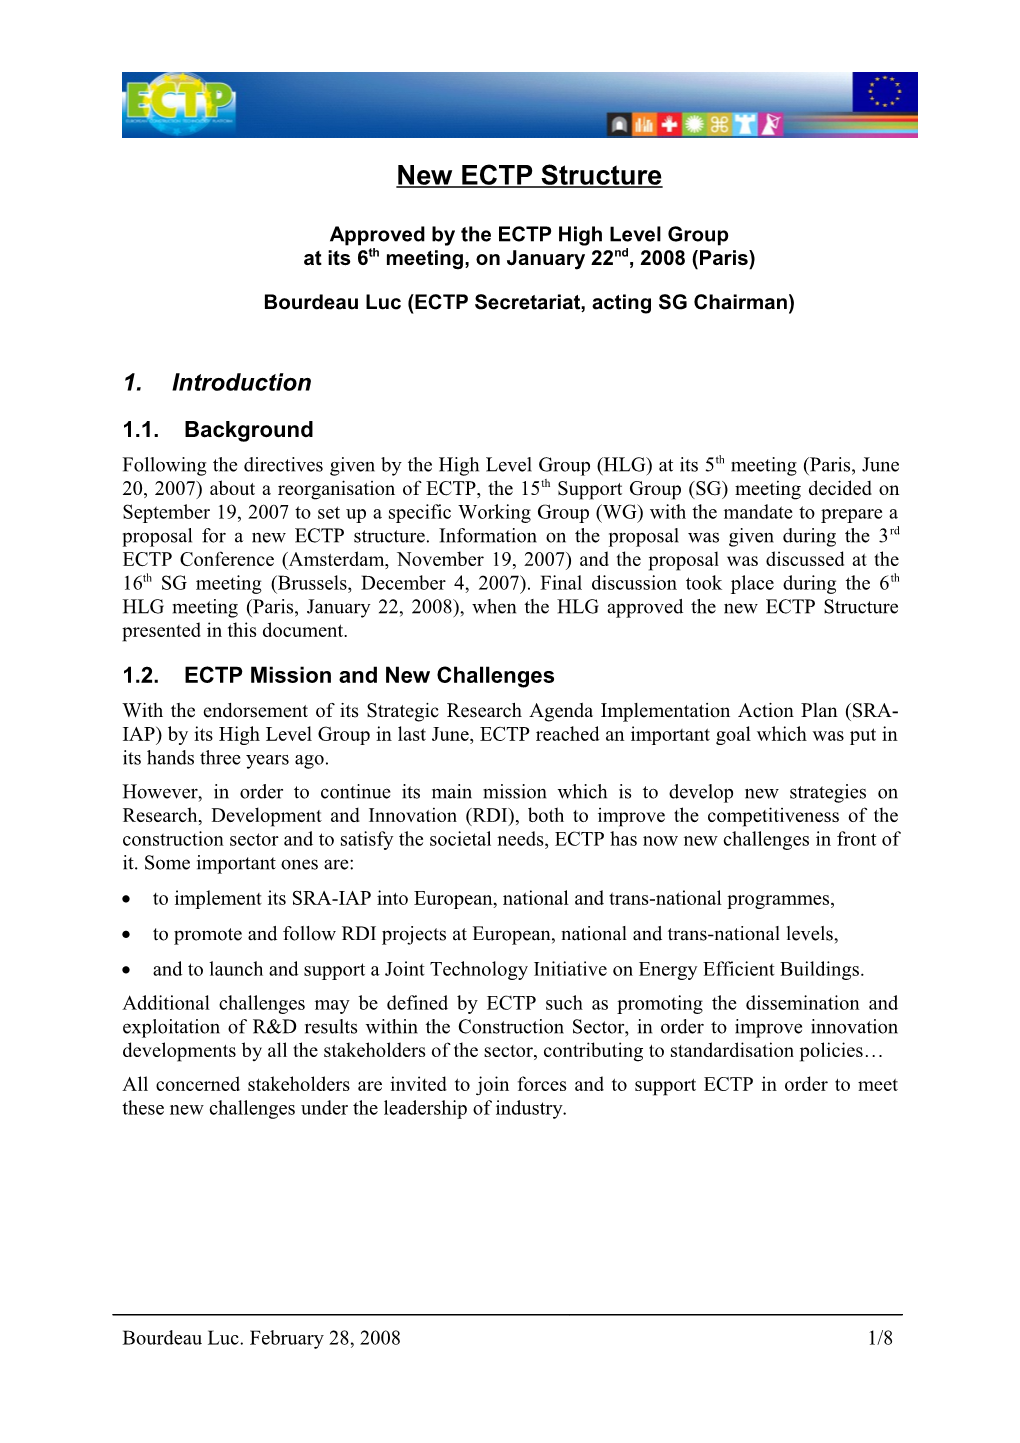 Note to Prepare the 2Nd Meeting of the WG on ECTP Reorganisation